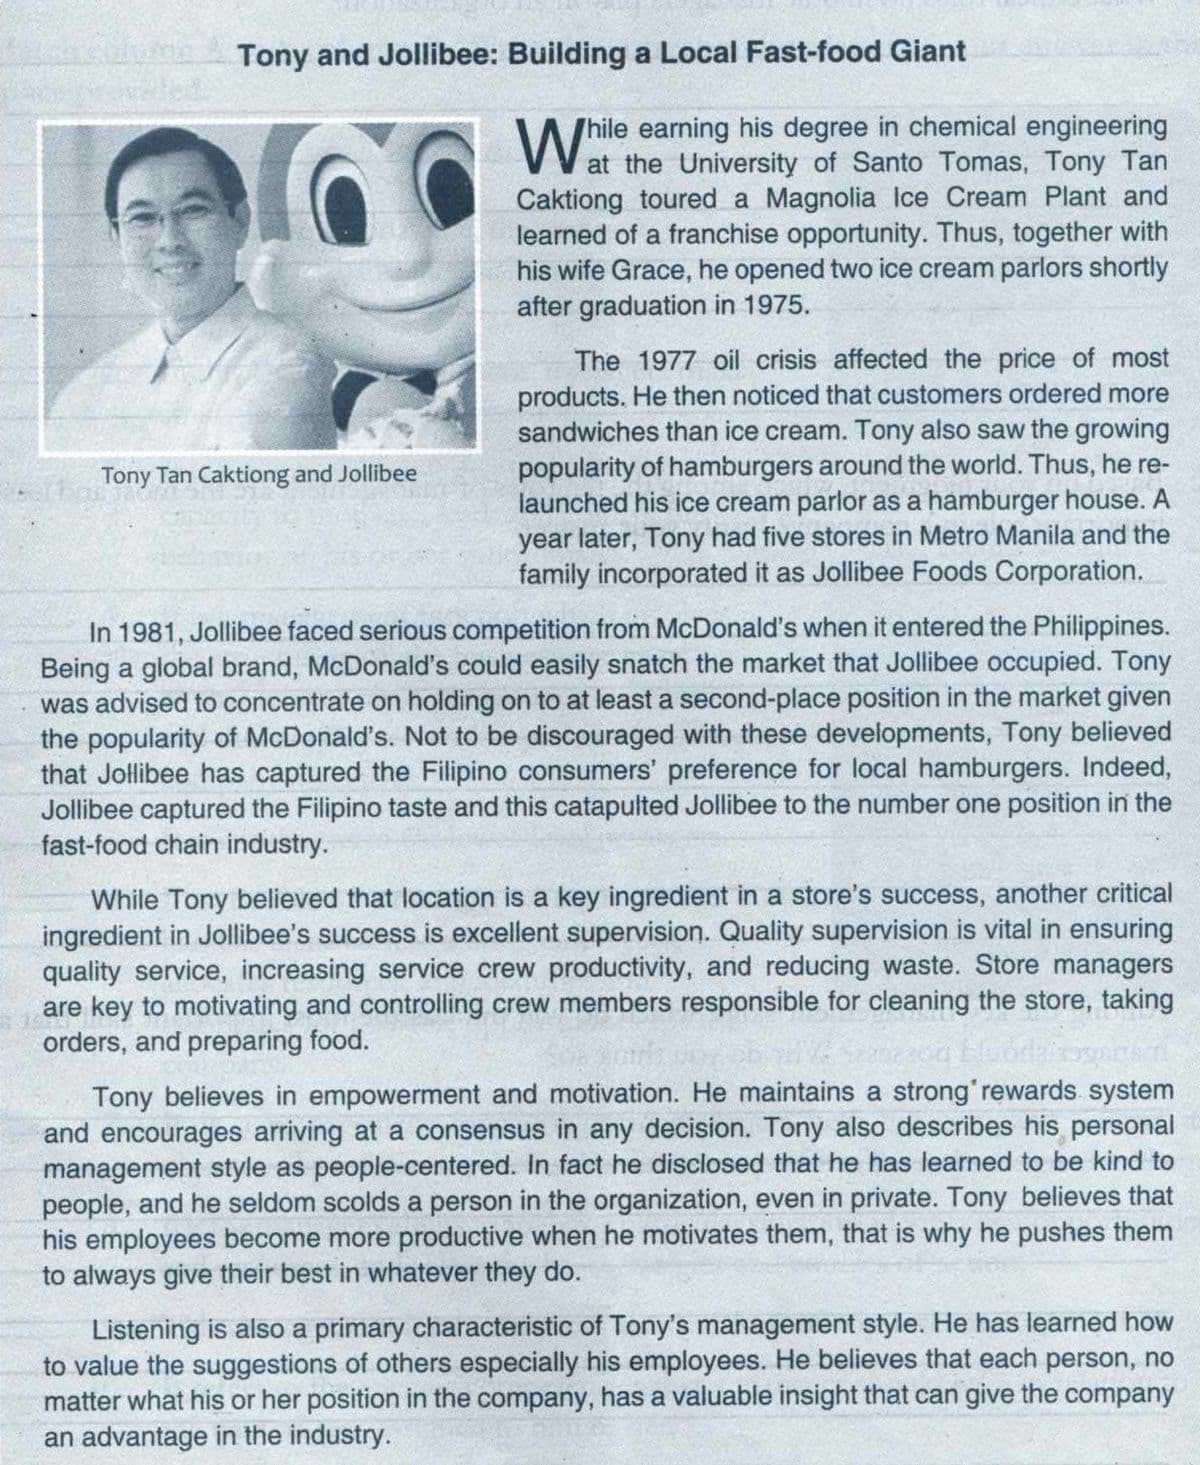 Tony and Jollibee: Building a Local Fast-food Giant
hile earning his degree in chemical engineering
at the University of Santo Tomas, Tony Tan
Caktiong toured a Magnolia Ice Cream Plant and
learned of a franchise opportunity. Thus, together with
his wife Grace, he opened two ice cream parlors shortly
after graduation in 1975.
The 1977 oil crisis affected the price of most
products. He then noticed that customers ordered more
sandwiches than ice cream. Tony also saw the growing
popularity of hamburgers around the world. Thus, he re-
launched his ice cream parlor as a hamburger house. A
year later, Tony had five stores in Metro Manila and the
family incorporated it as Jollibee Foods Corporation.
Tony Tan Caktiong and Jollibee
In 1981, Jollibee faced serious competition from McDonald's when it entered the Philippines.
Being a global brand, McDonald's could easily snatch the market that Jollibee occupied. Tony
was advised to concentrate on holding on to at least a second-place position in the market given
the popularity of McDonald's. Not to be discouraged with these developments, Tony believed
that Jollibee has captured the Filipino consumers' preference for local hamburgers. Indeed,
Jollibee captured the Filipino taste and this catapulted Jollibee to the number one position in the
fast-food chain industry.
While Tony believed that location is a key ingredient in a store's success, another critical
ingredient in Jollibee's success is excellent supervision. Quality supervision is vital in ensuring
quality service, increasing service crew productivity, and reducing waste. Store managers
are key to motivating and controlling crew members responsible for cleaning the store, taking
orders, and preparing food.
Tony believes in empowerment and motivation. He maintains a strong'rewards system
and encourages arriving at a consensus in any decision. Tony also describes his personal
management style as people-centered. In fact he disclosed that he has learned to be kind to
people, and he seldom scolds a person in the organization, even in private. Tony believes that
his employees become more productive when he motivates them, that is why he pushes them
to always give their best in whatever they do.
Listening is also a primary characteristic of Tony's management style. He has learned how
to value the suggestions of others especially his employees. He believes that each person, no
matter what his or her position in the company, has a valuable insight that can give the company
an advantage in the industry.
